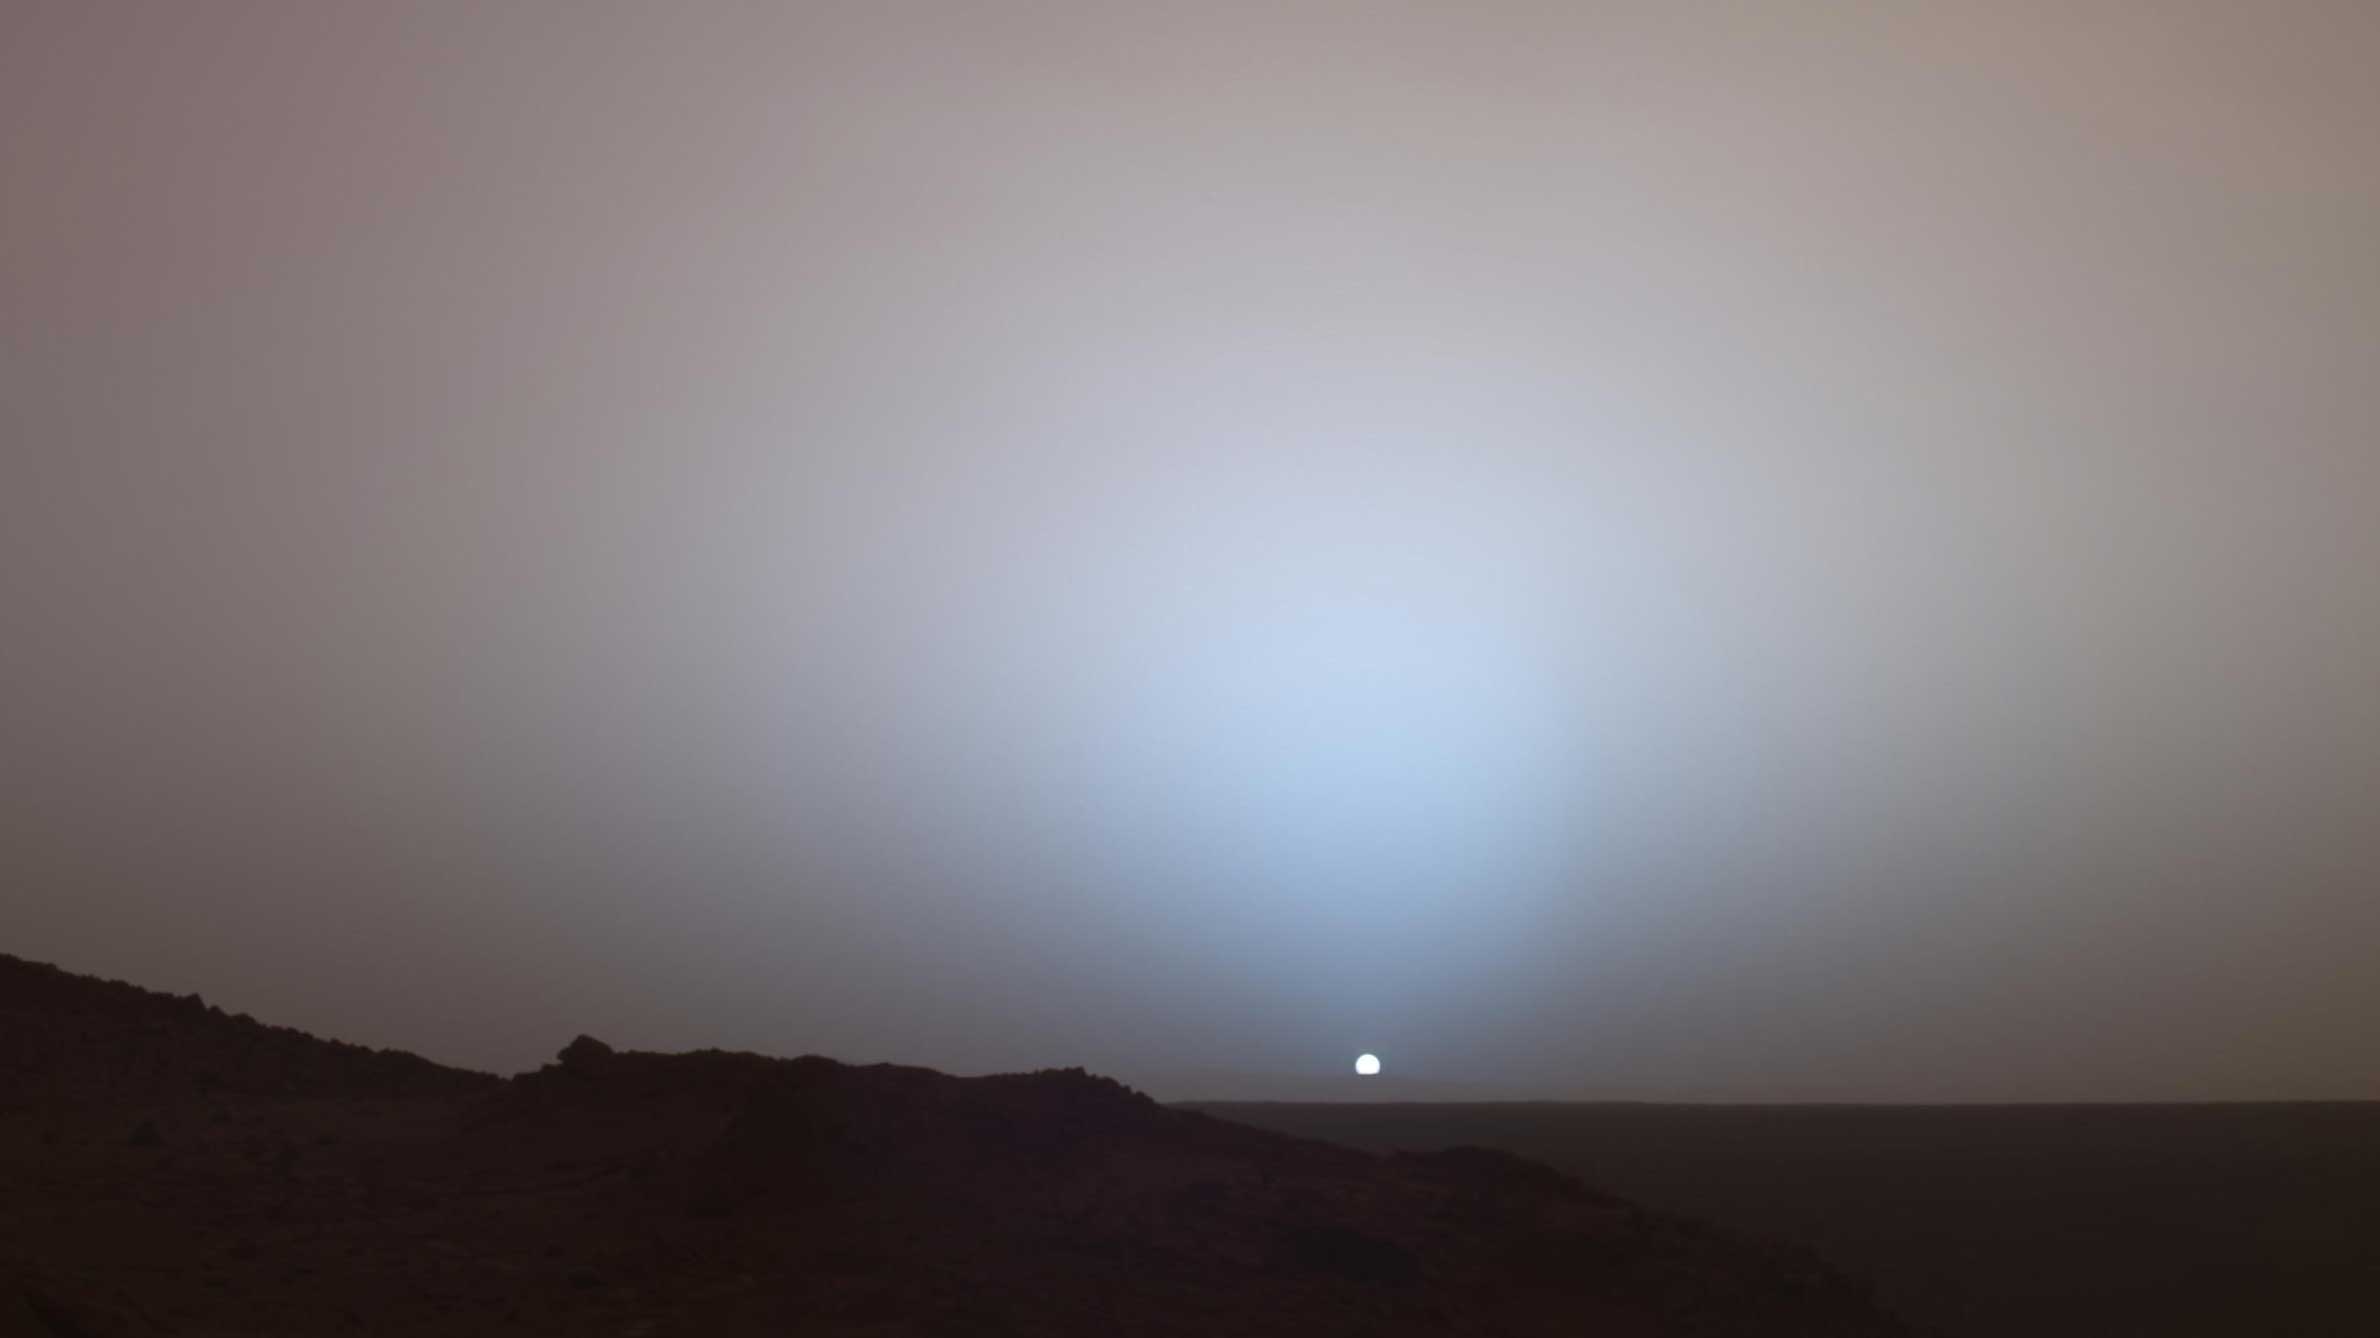 The Sun glows as it sets in the sky over Mars.